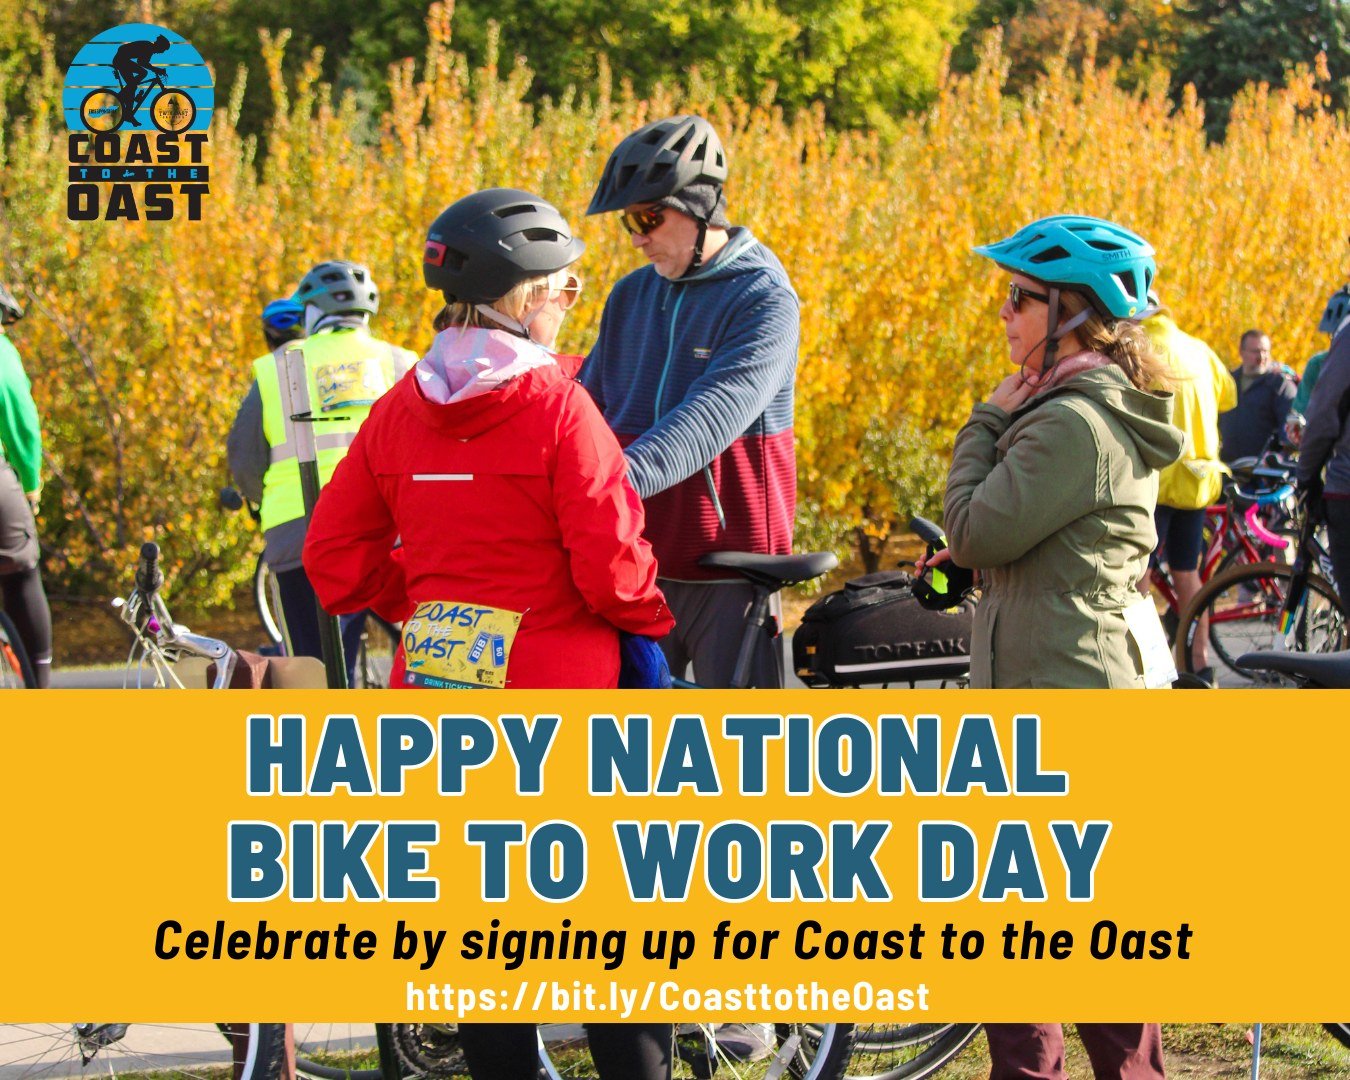 Today is National Bike to Work Day 🚲

Celebrate your two wheels by signing up for the Coast to the Oast event on Saturday, September 14!

Choose the 30-mile or 10-mile fully supported ride, which will be marked to help guide you around the scenic Ca